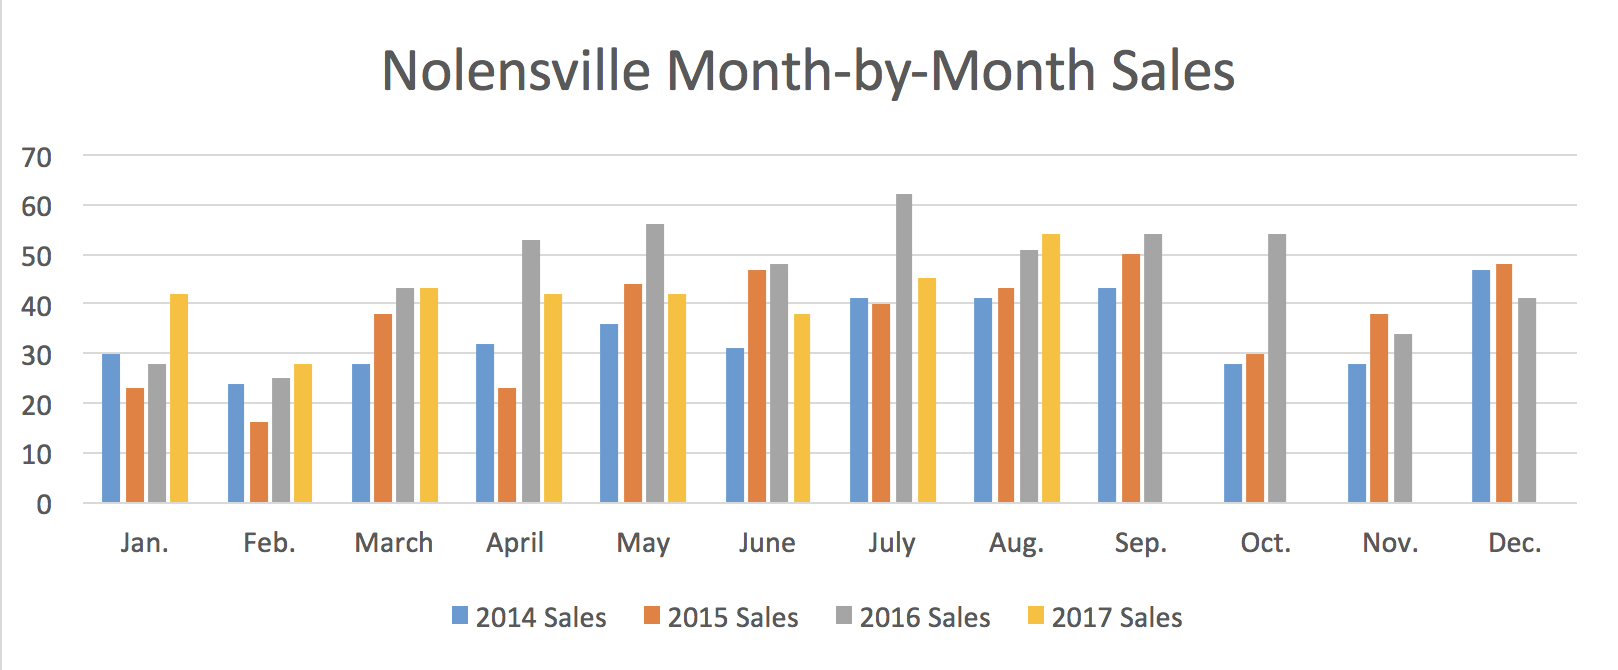 Nolensville Month-by-Month Sales August 2017